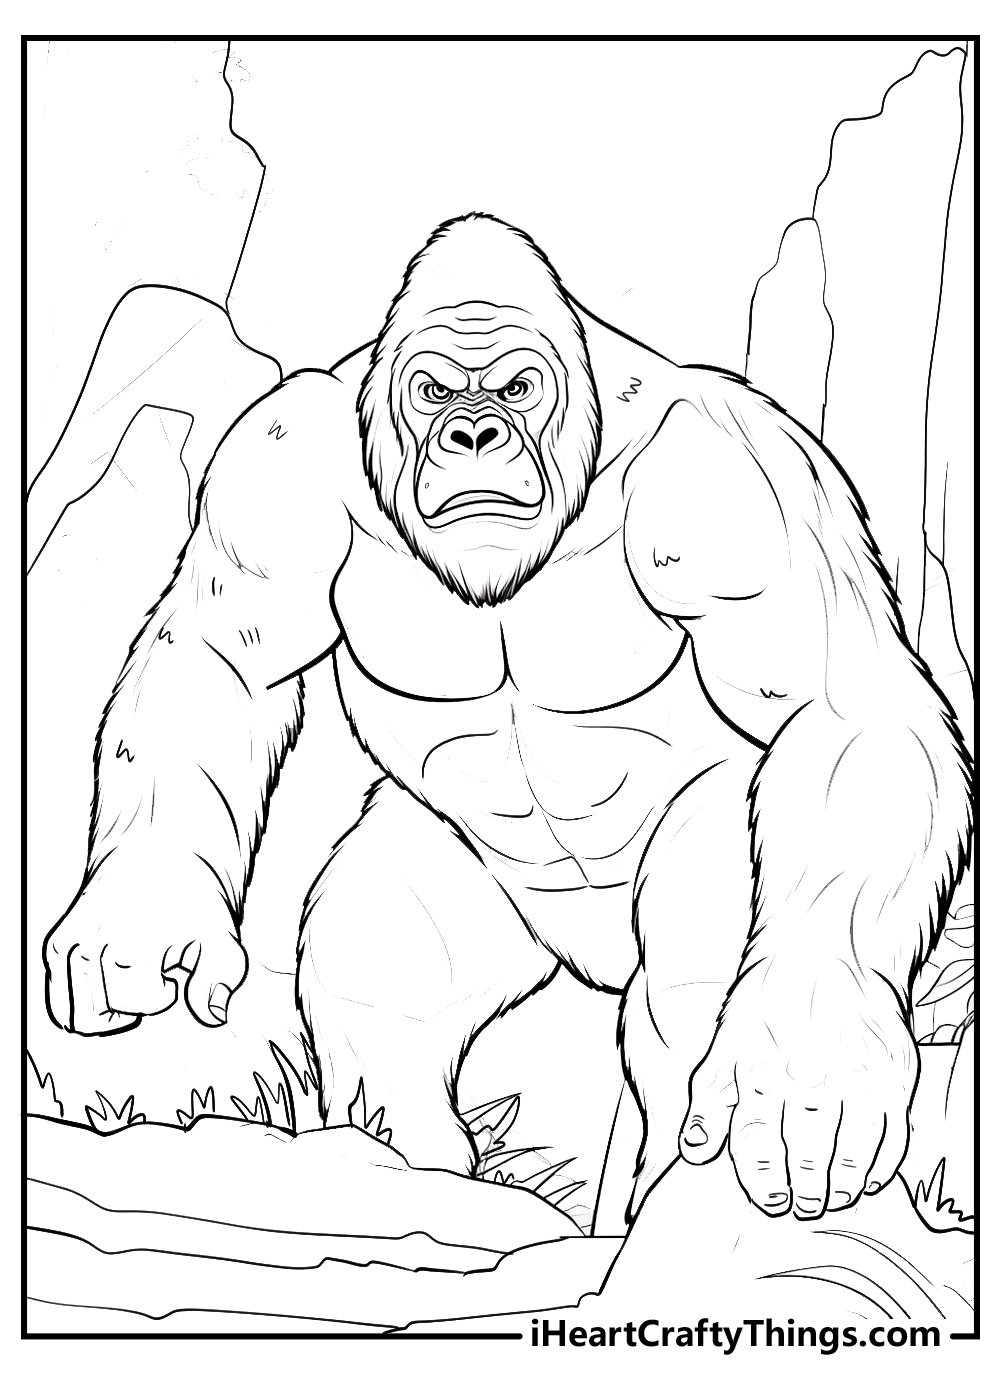 Printable king kong coloring pages updated